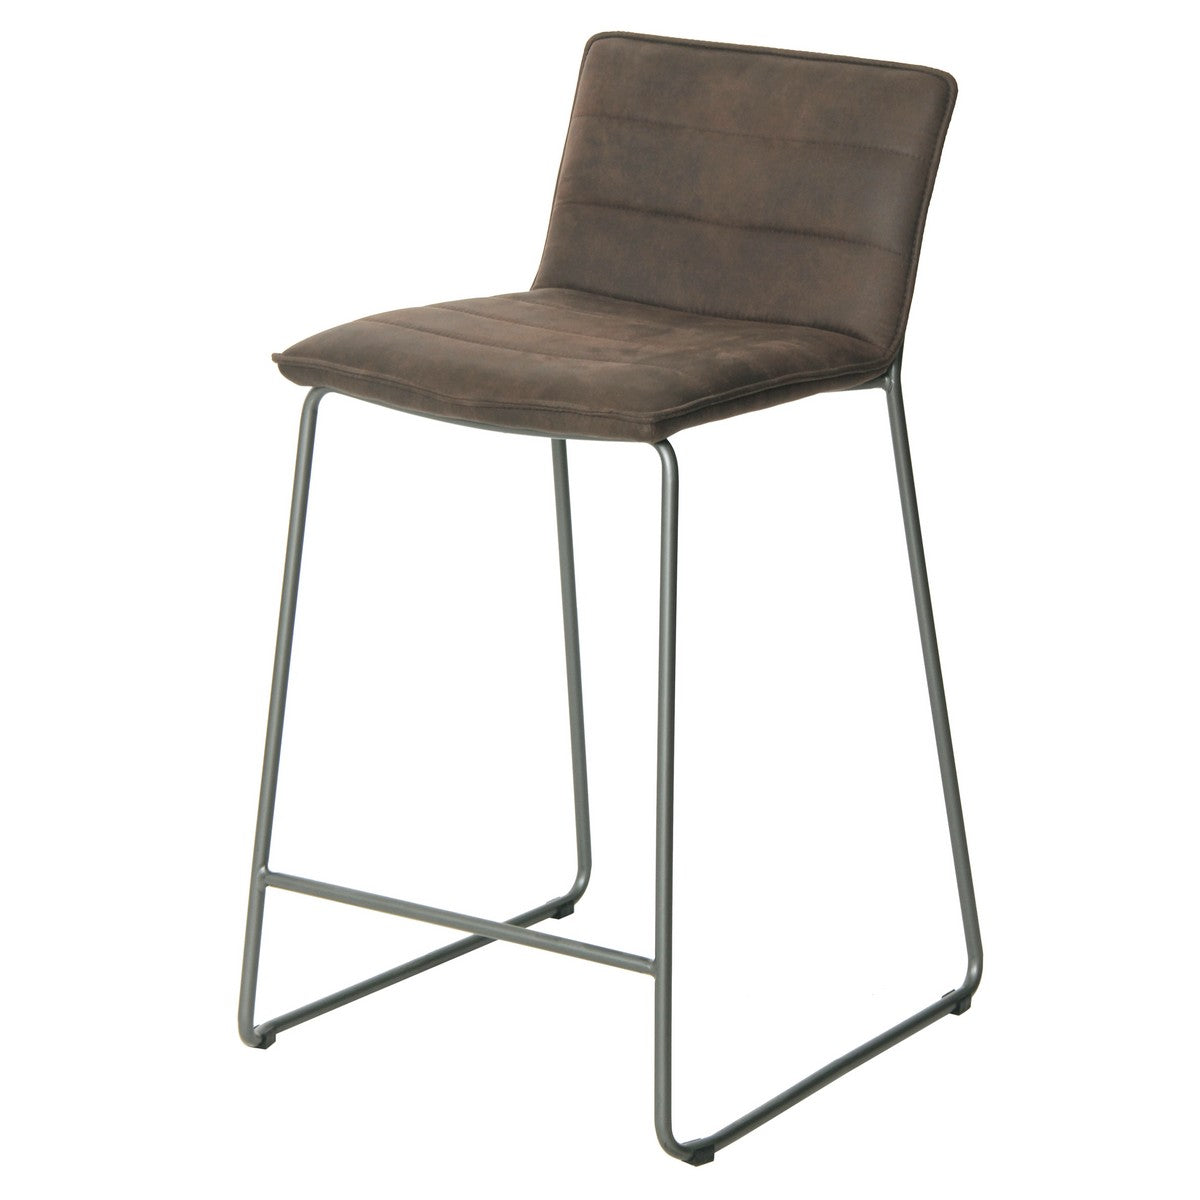 Keane PU Leather Bar Stool (Set of 2) by New Pacific Direct - 3400019